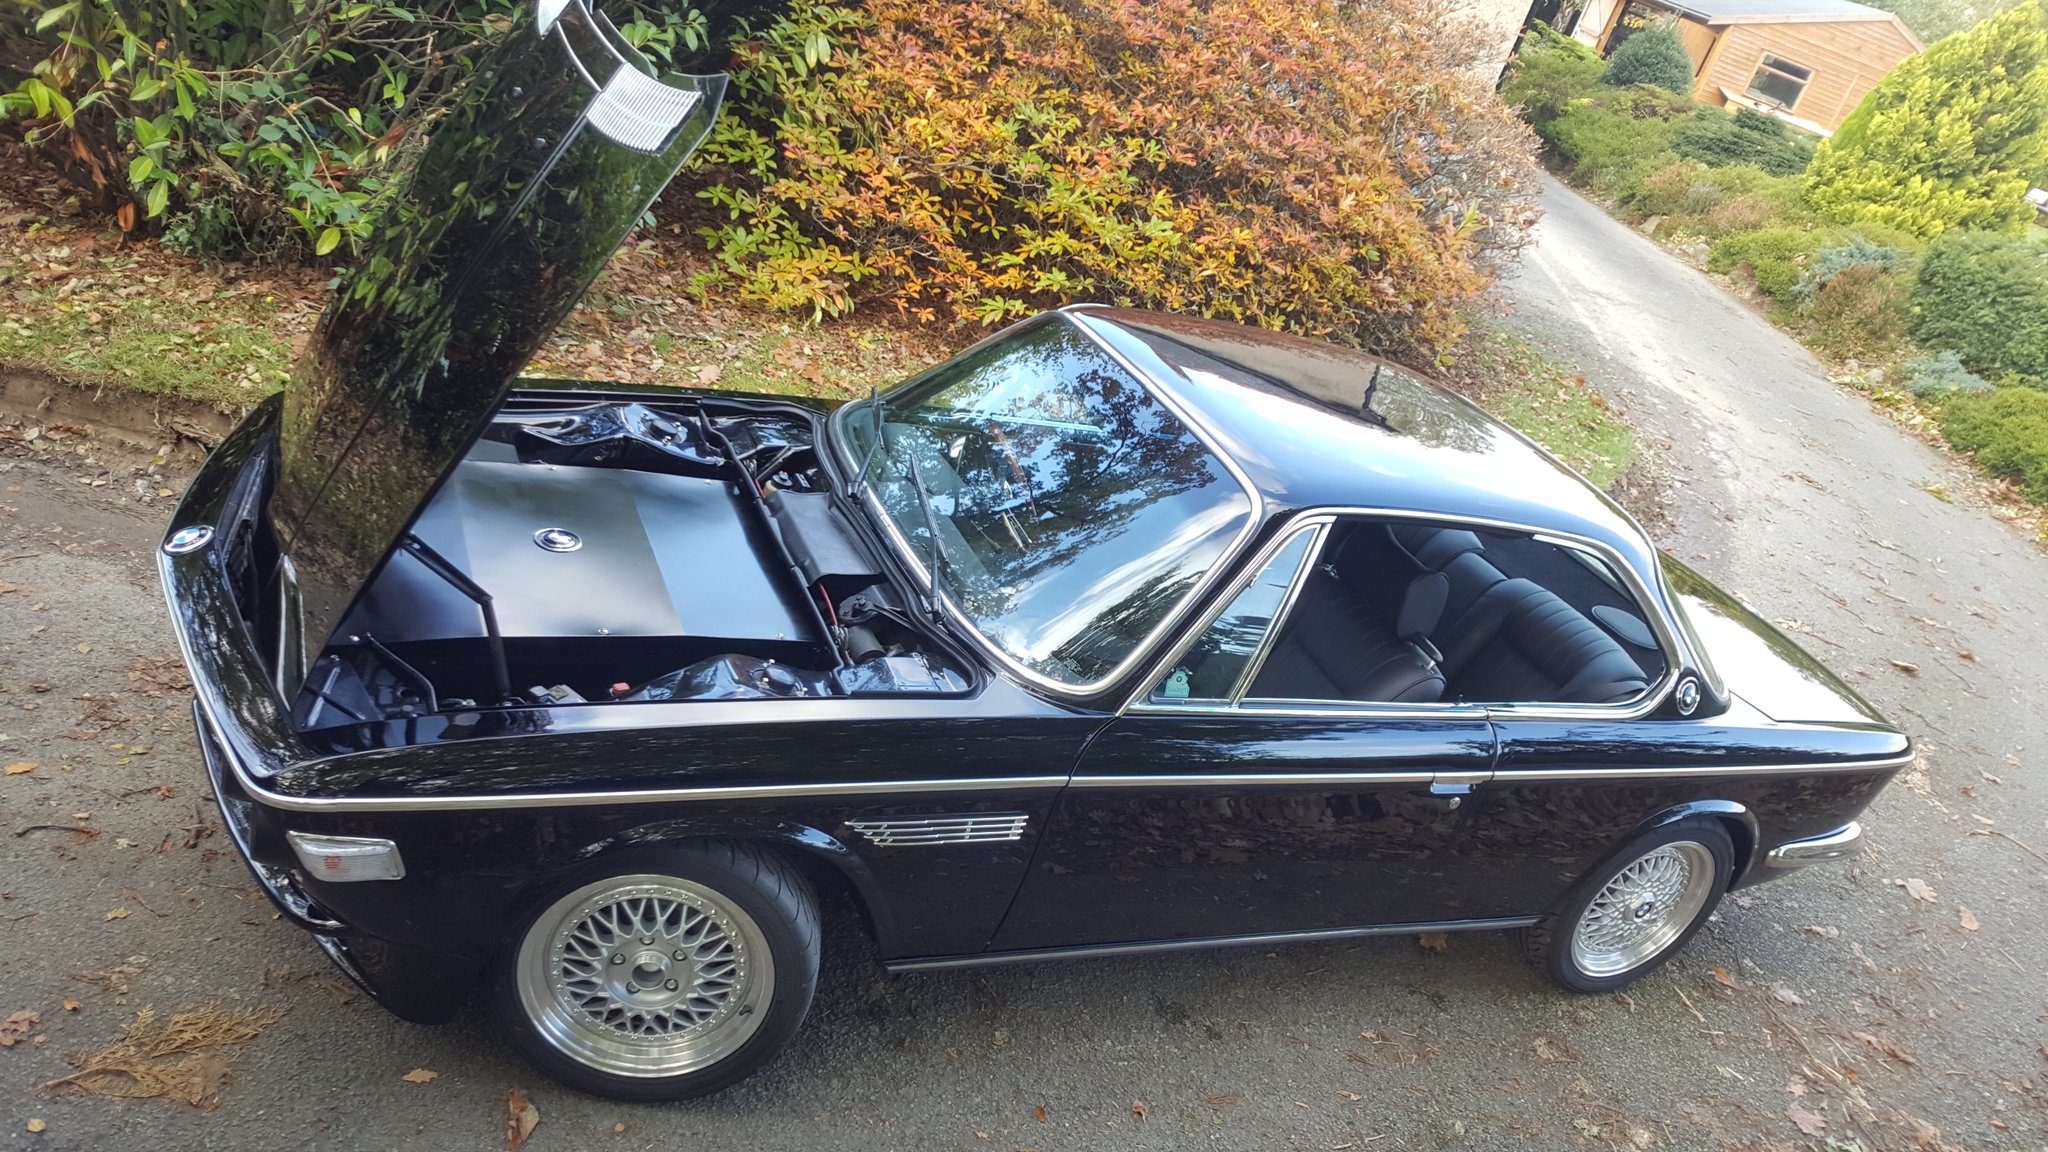 Electric Classic Cars on Twitter: "Electric BMW E9 test drive in the